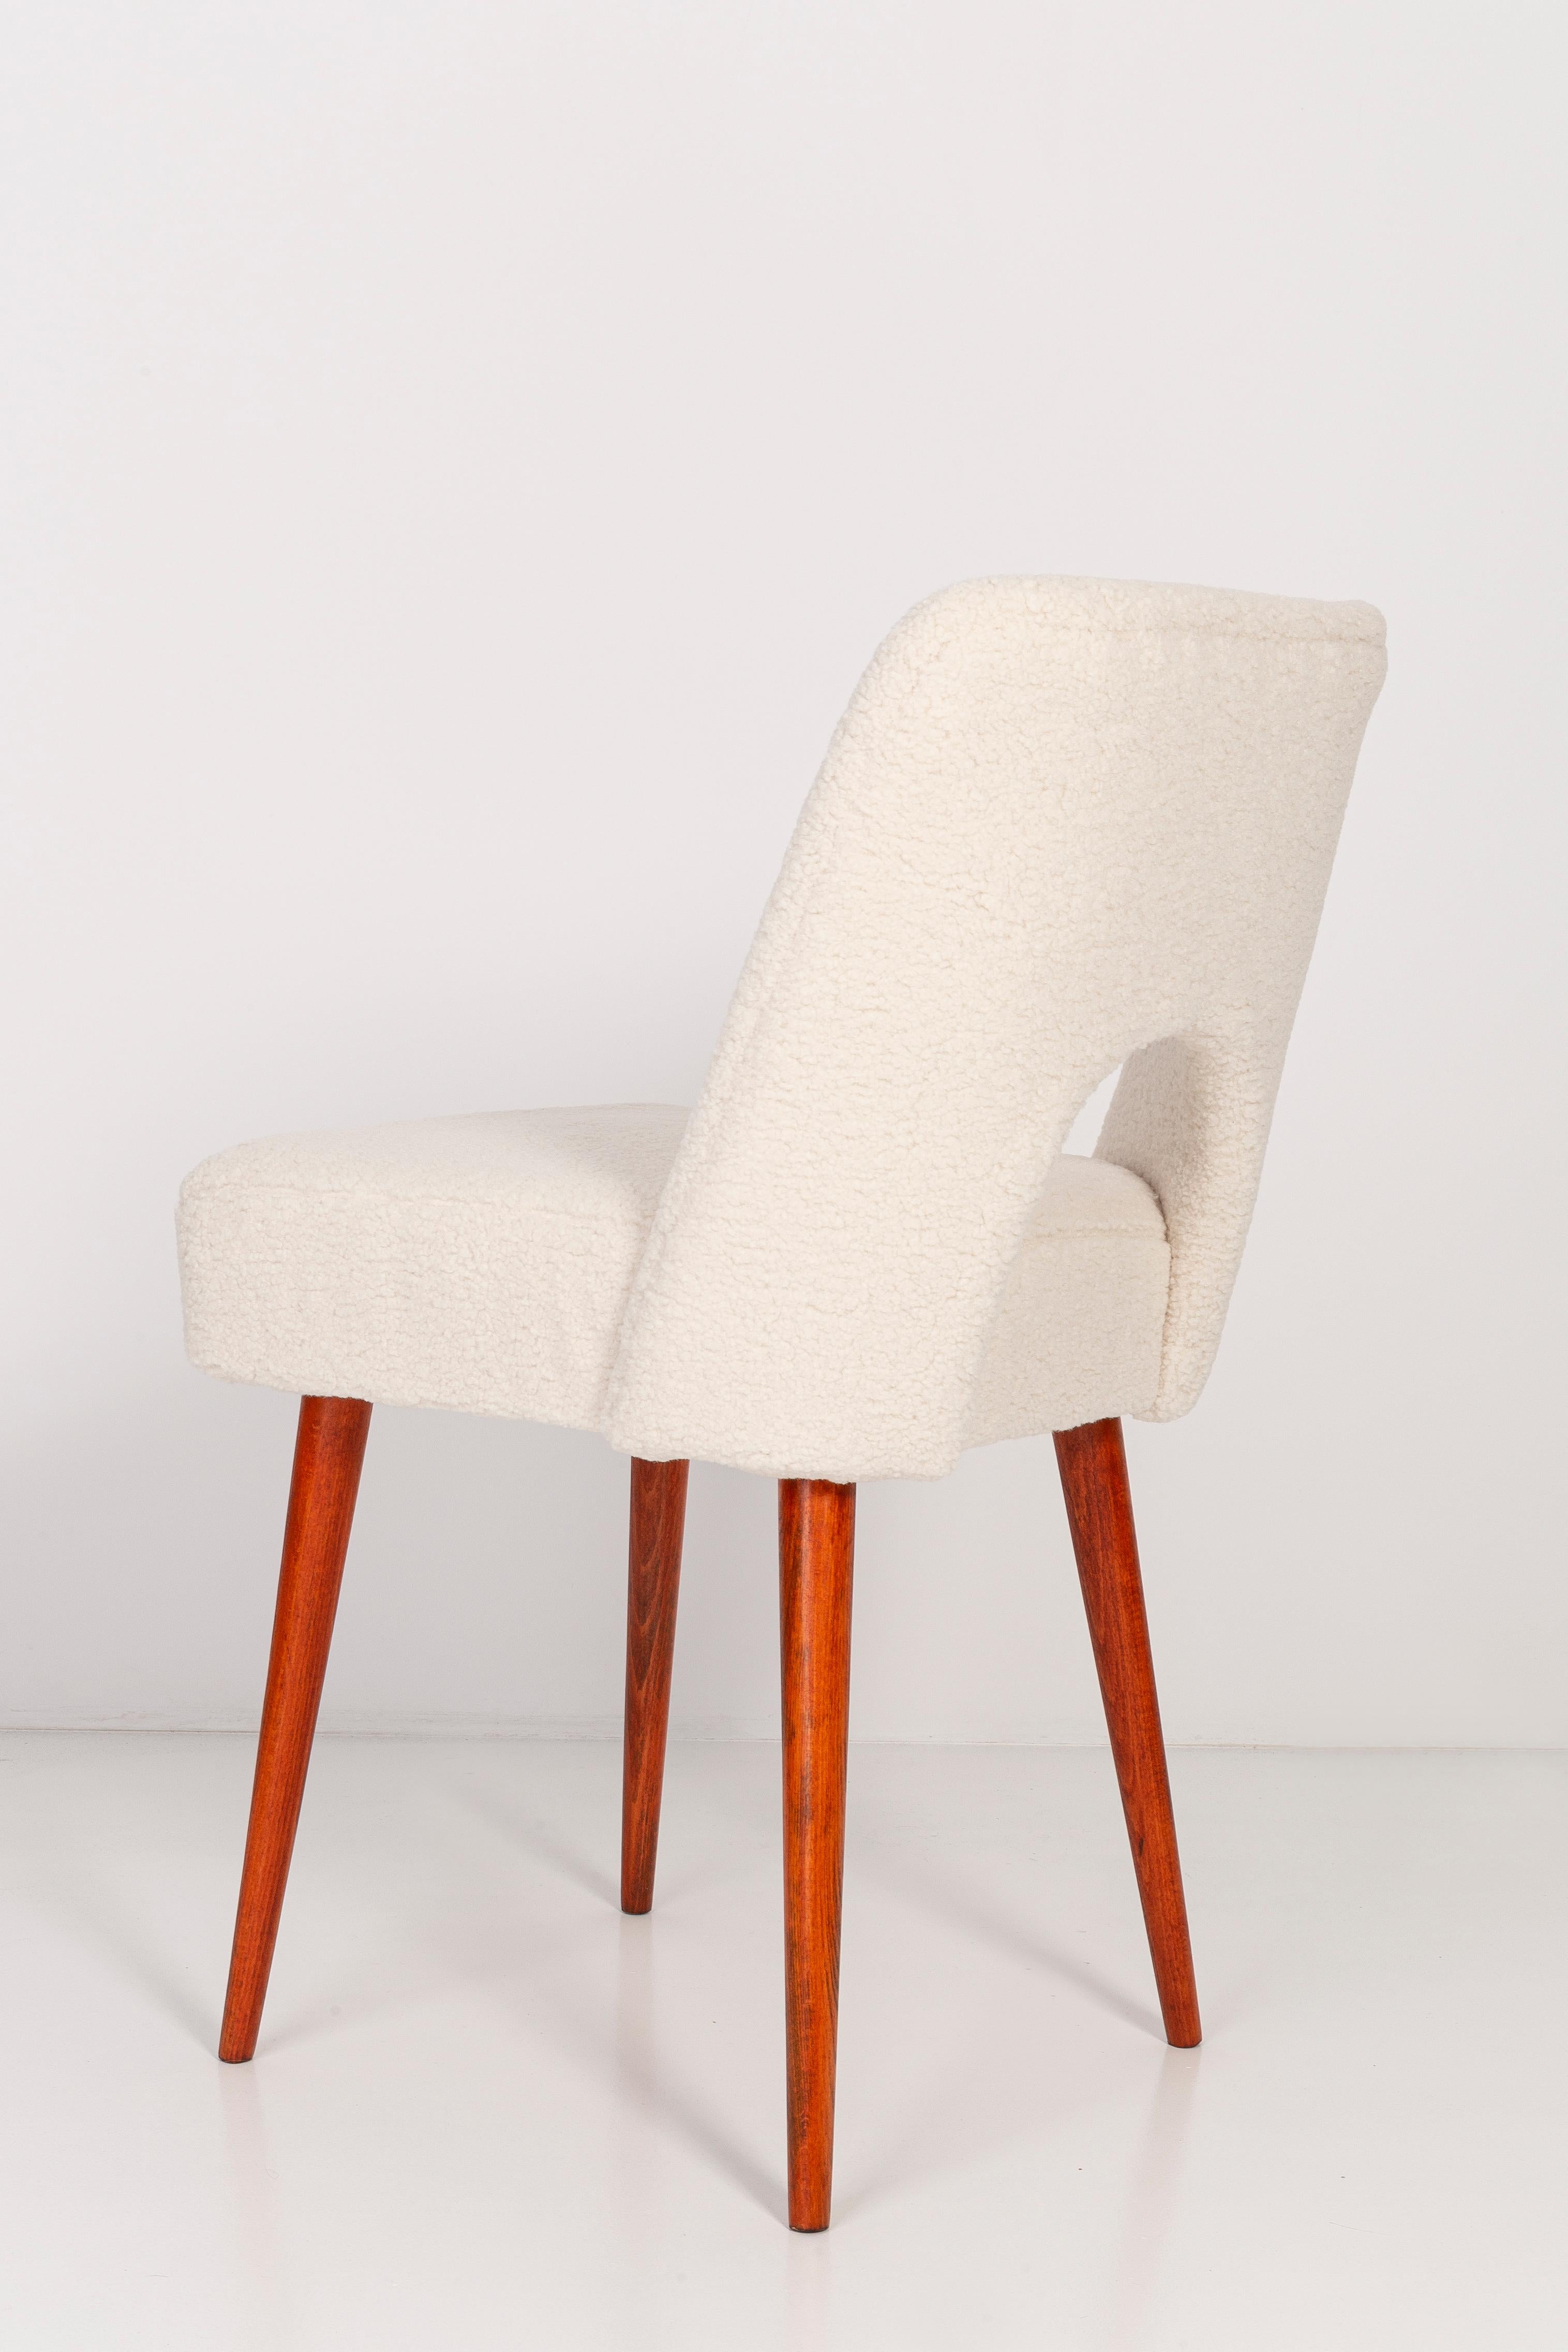 Hand-Crafted Light Crème Boucle 'Shell' Chair, 1960s For Sale